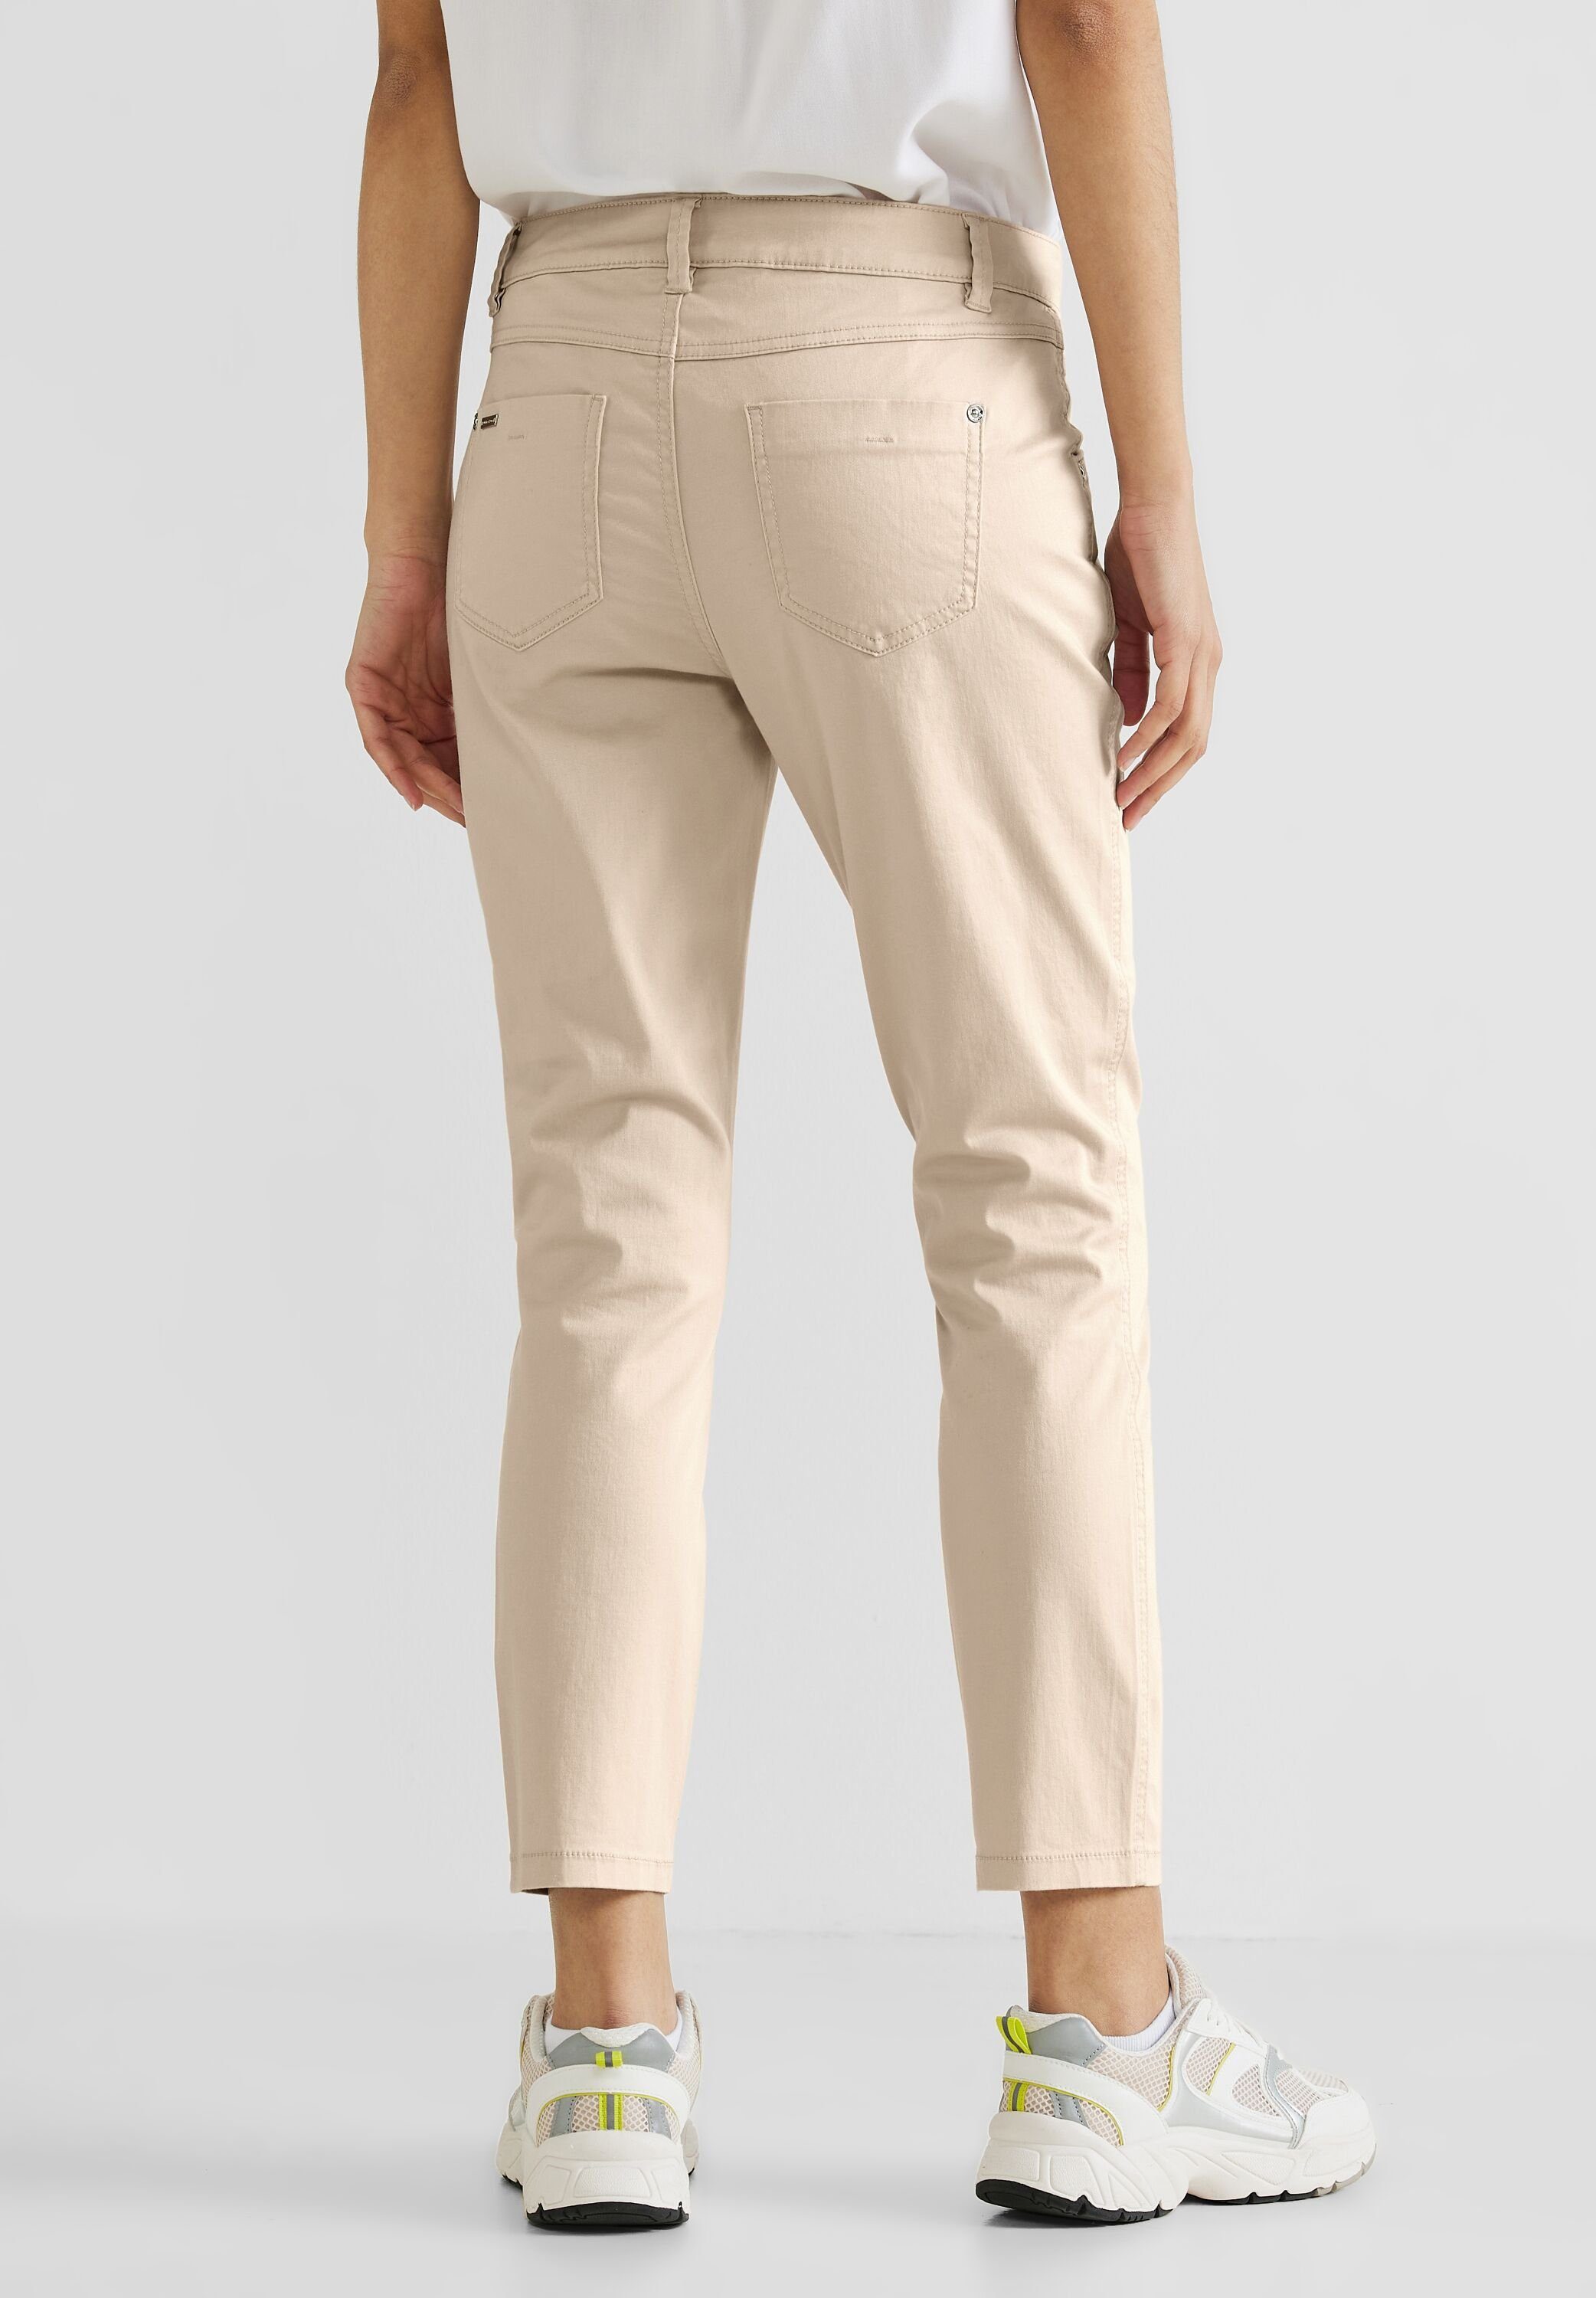 STREET ONE Stoffhose 4-Pocket Style, Damen Casual Fit Hose in 7/8-Länge